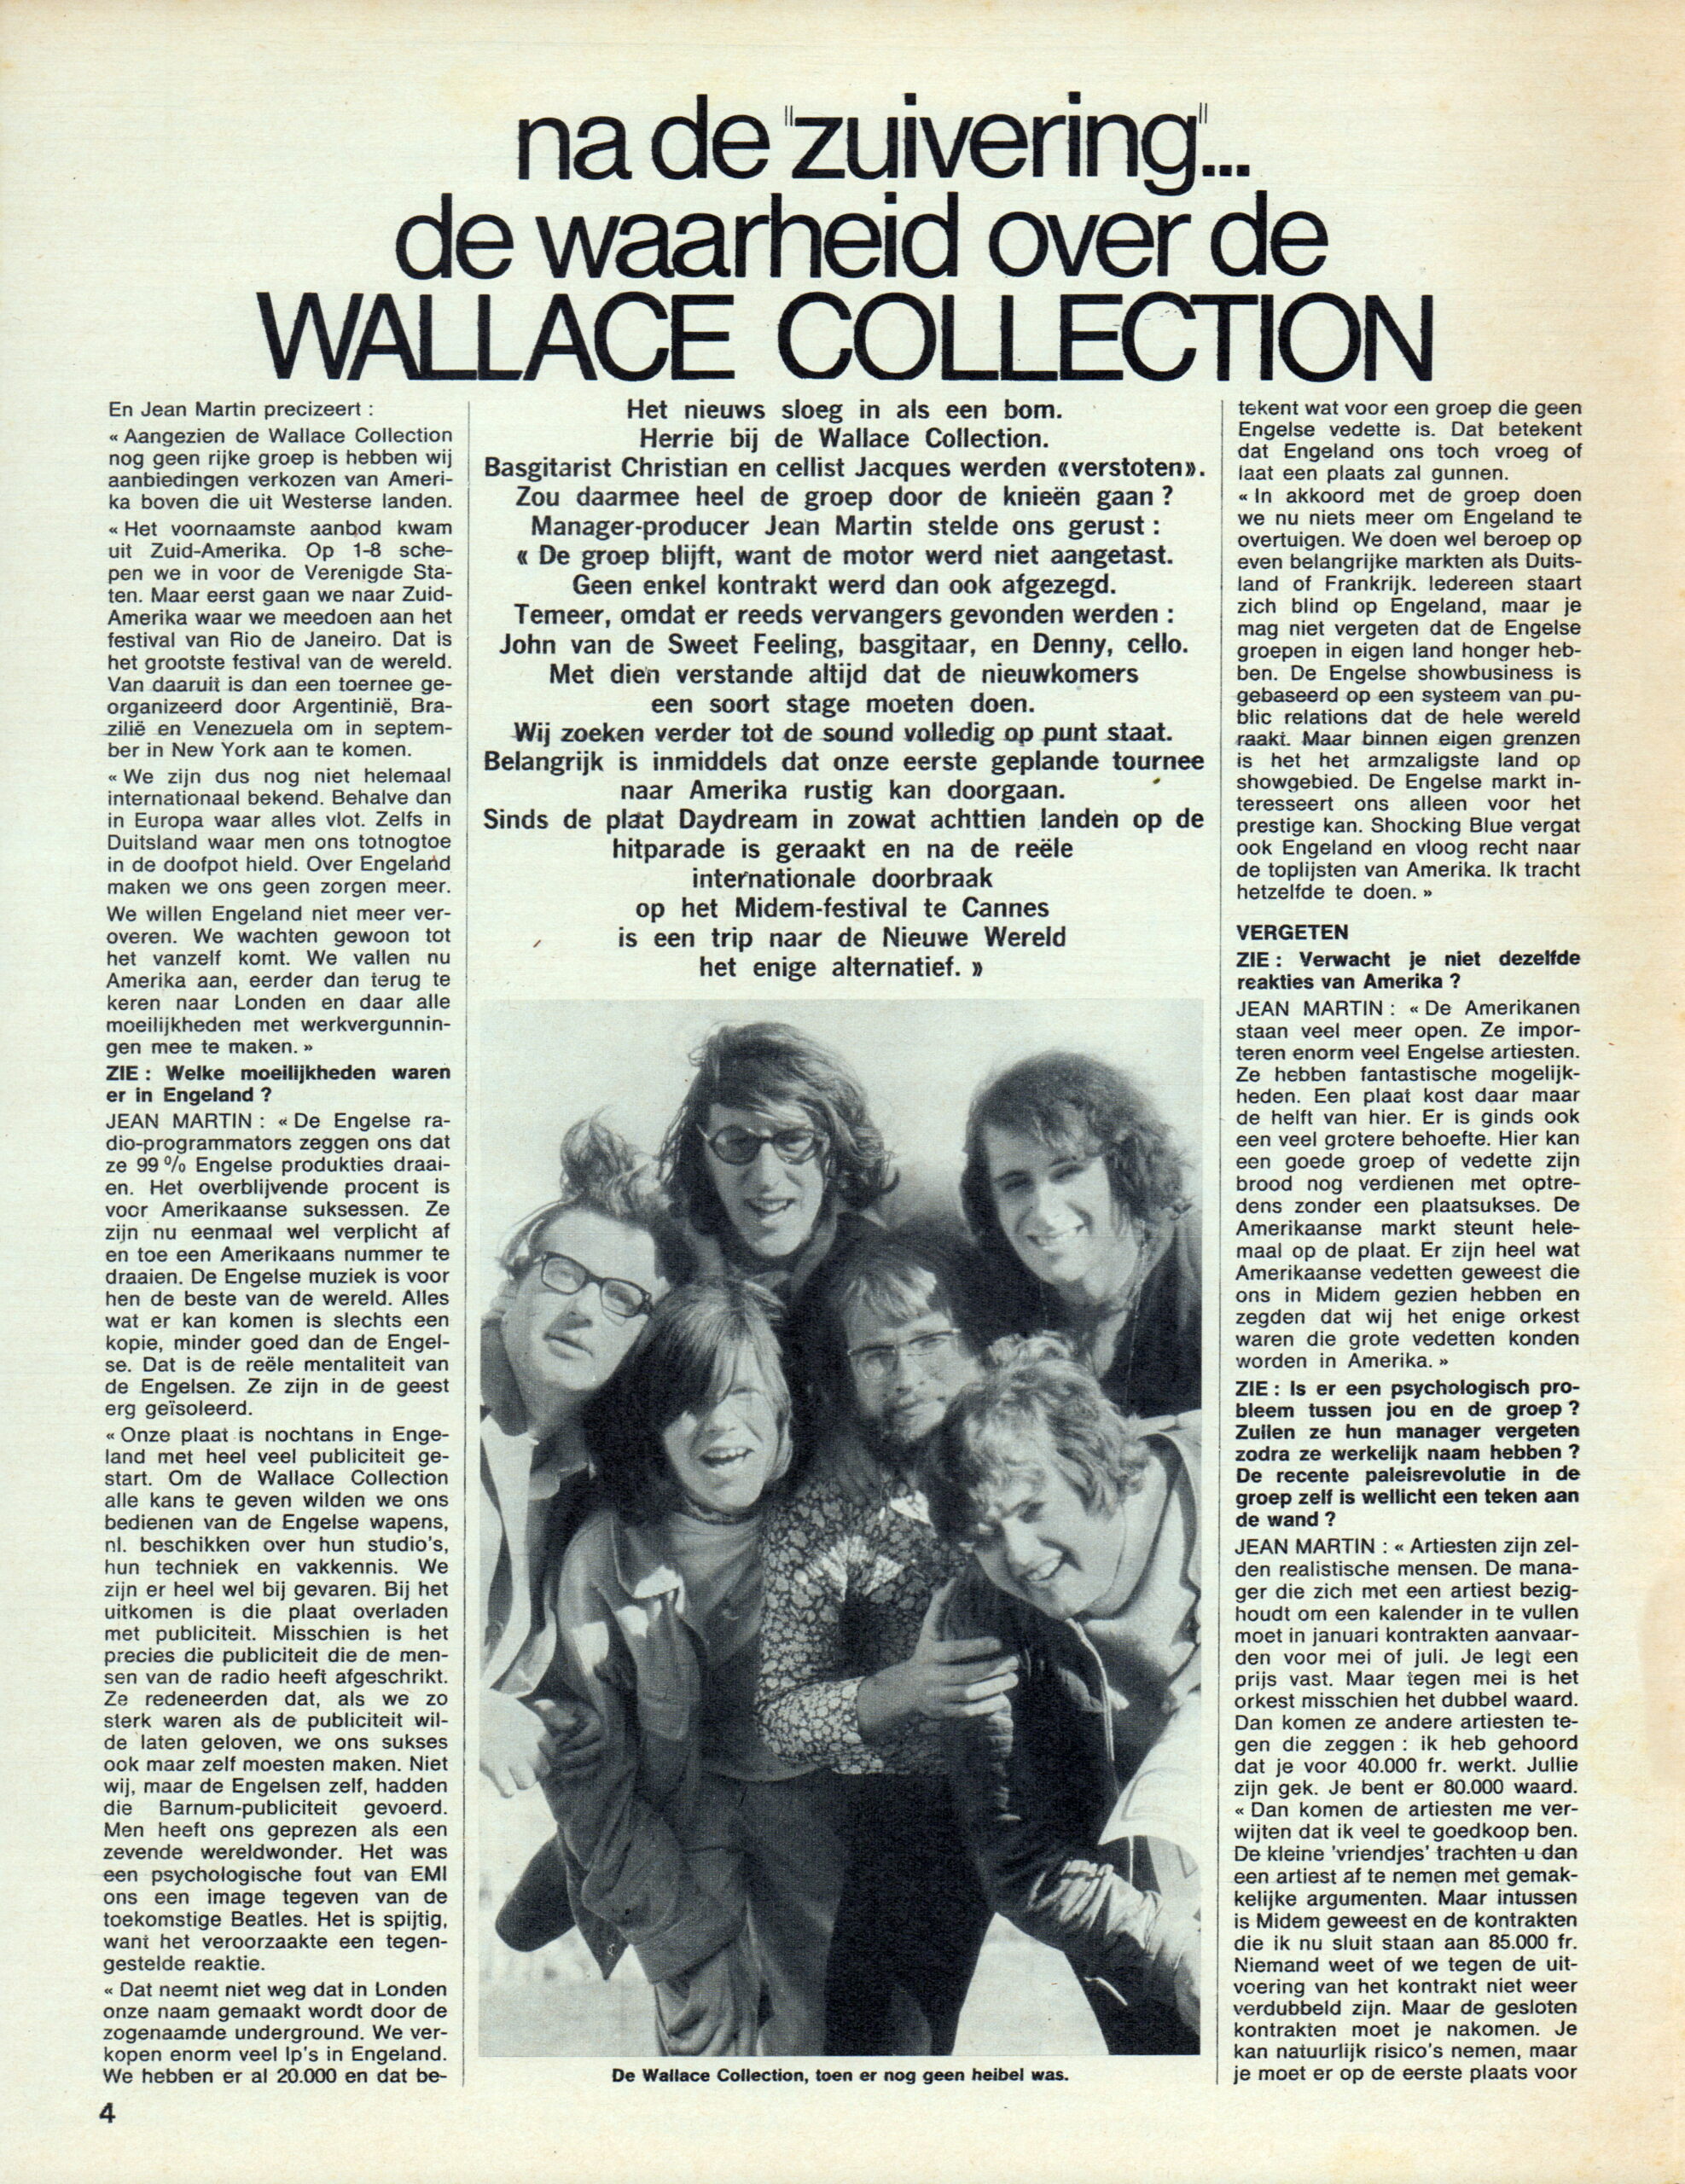 les wallace collection